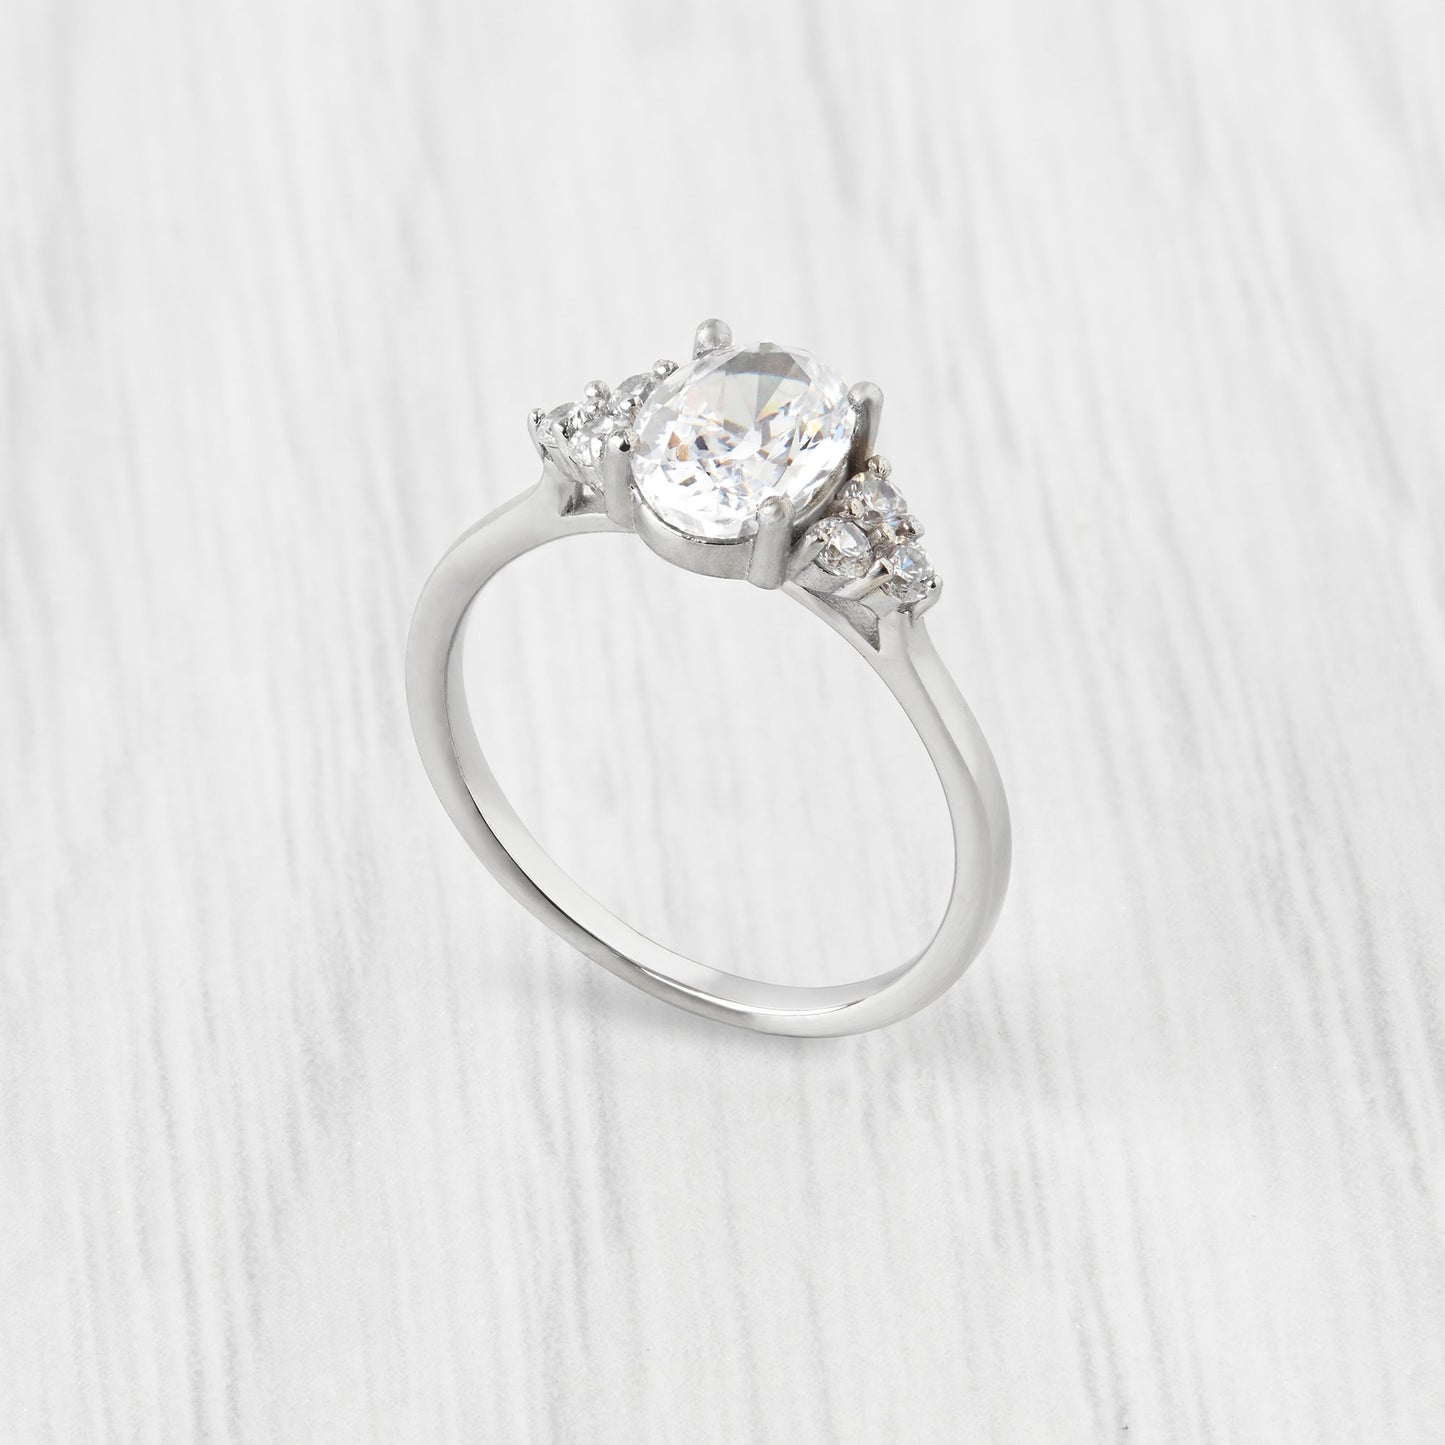 Crushed ICE CUT Genuine moissanite Oval Ice cut 3 stone engagement Ring in White Gold or Titanium  - engagement ring - handmade ring